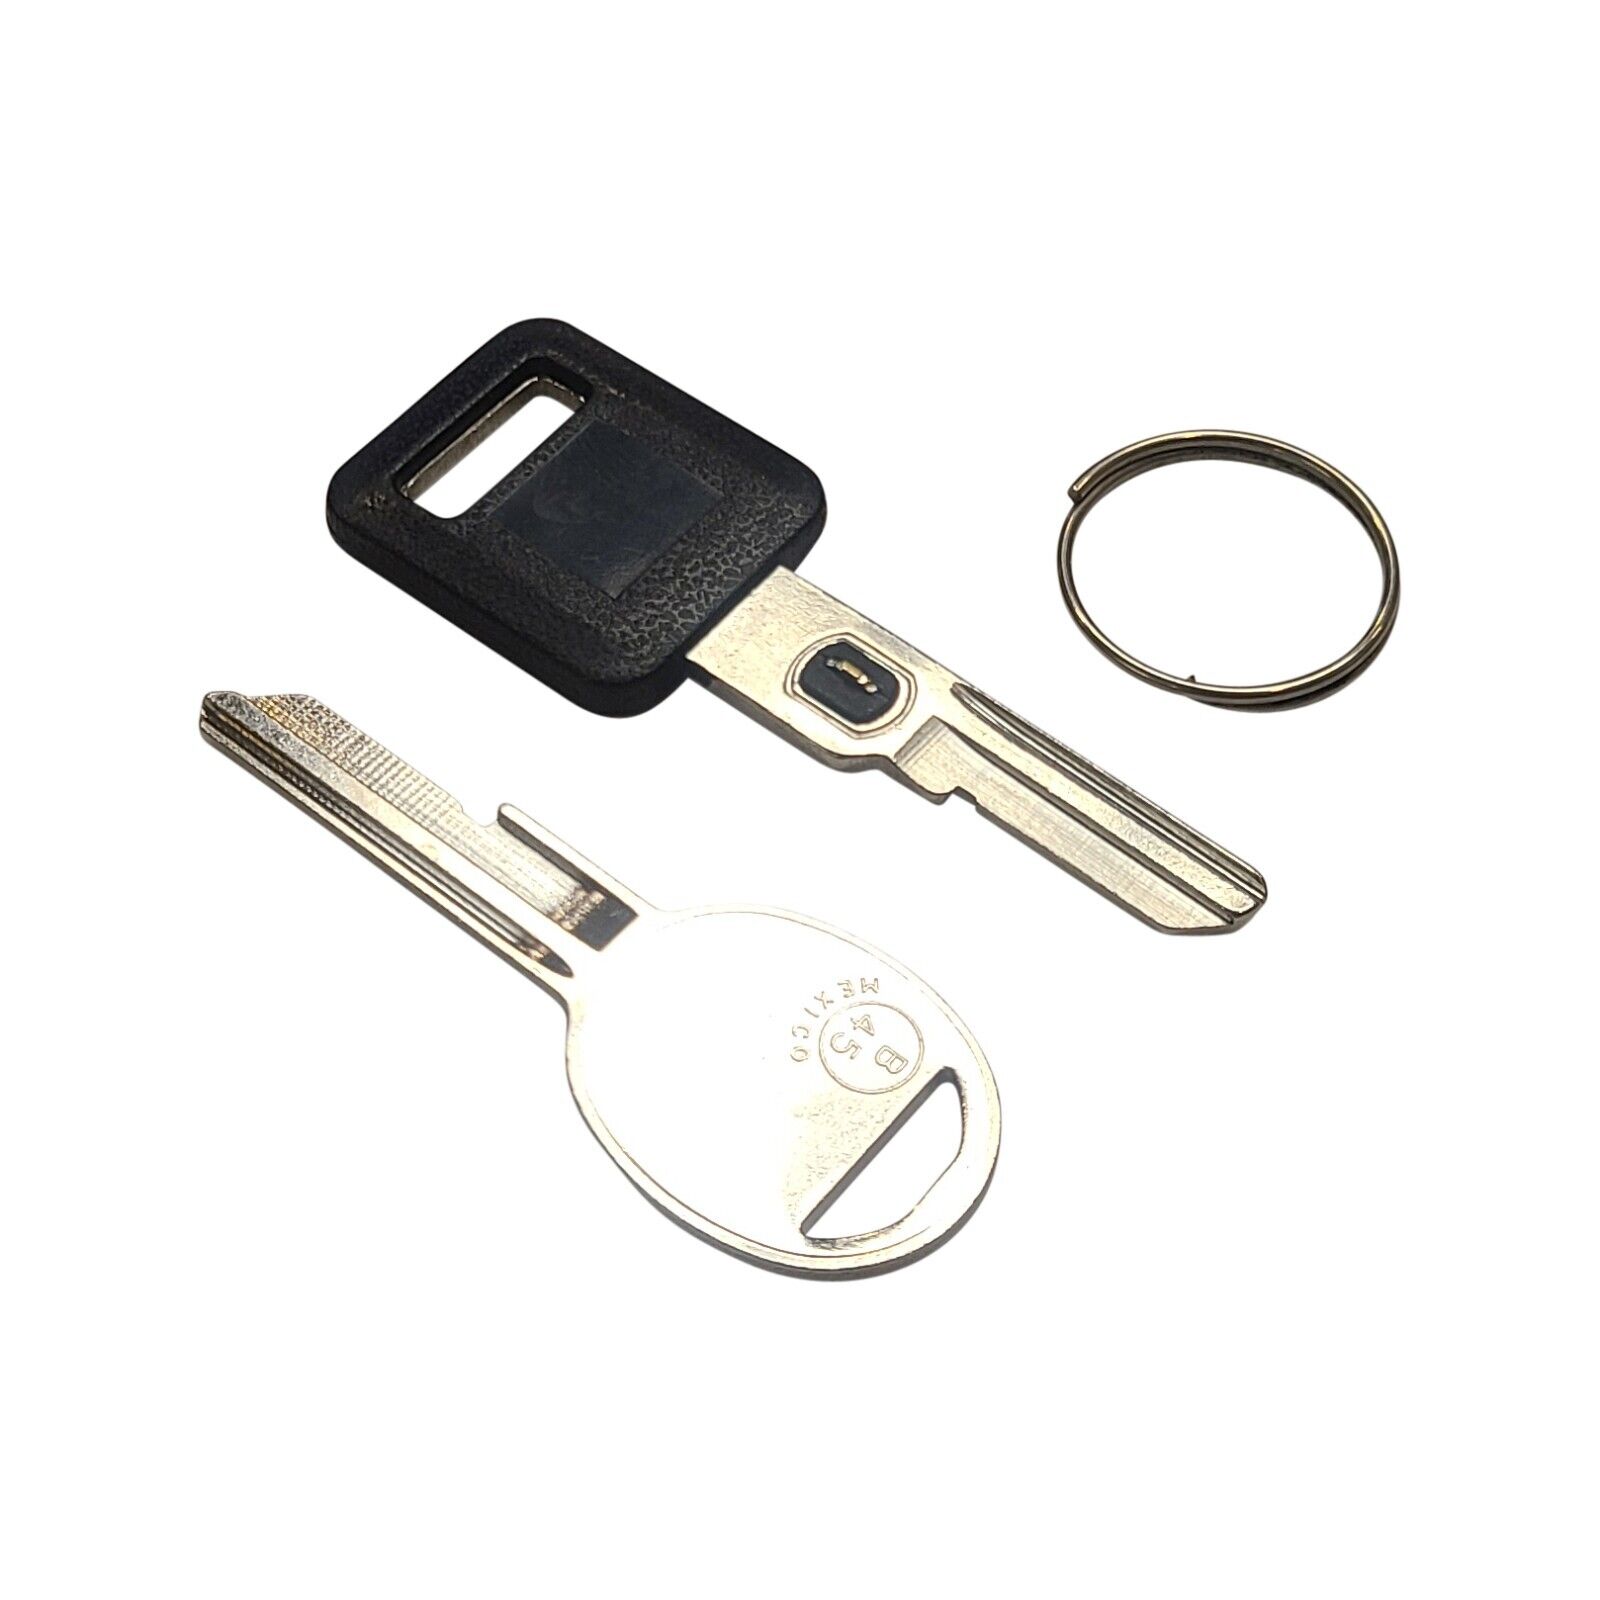 New Ignition VATS Resistor Key B62-P11 For Gm Vehicles And H Door Key B45